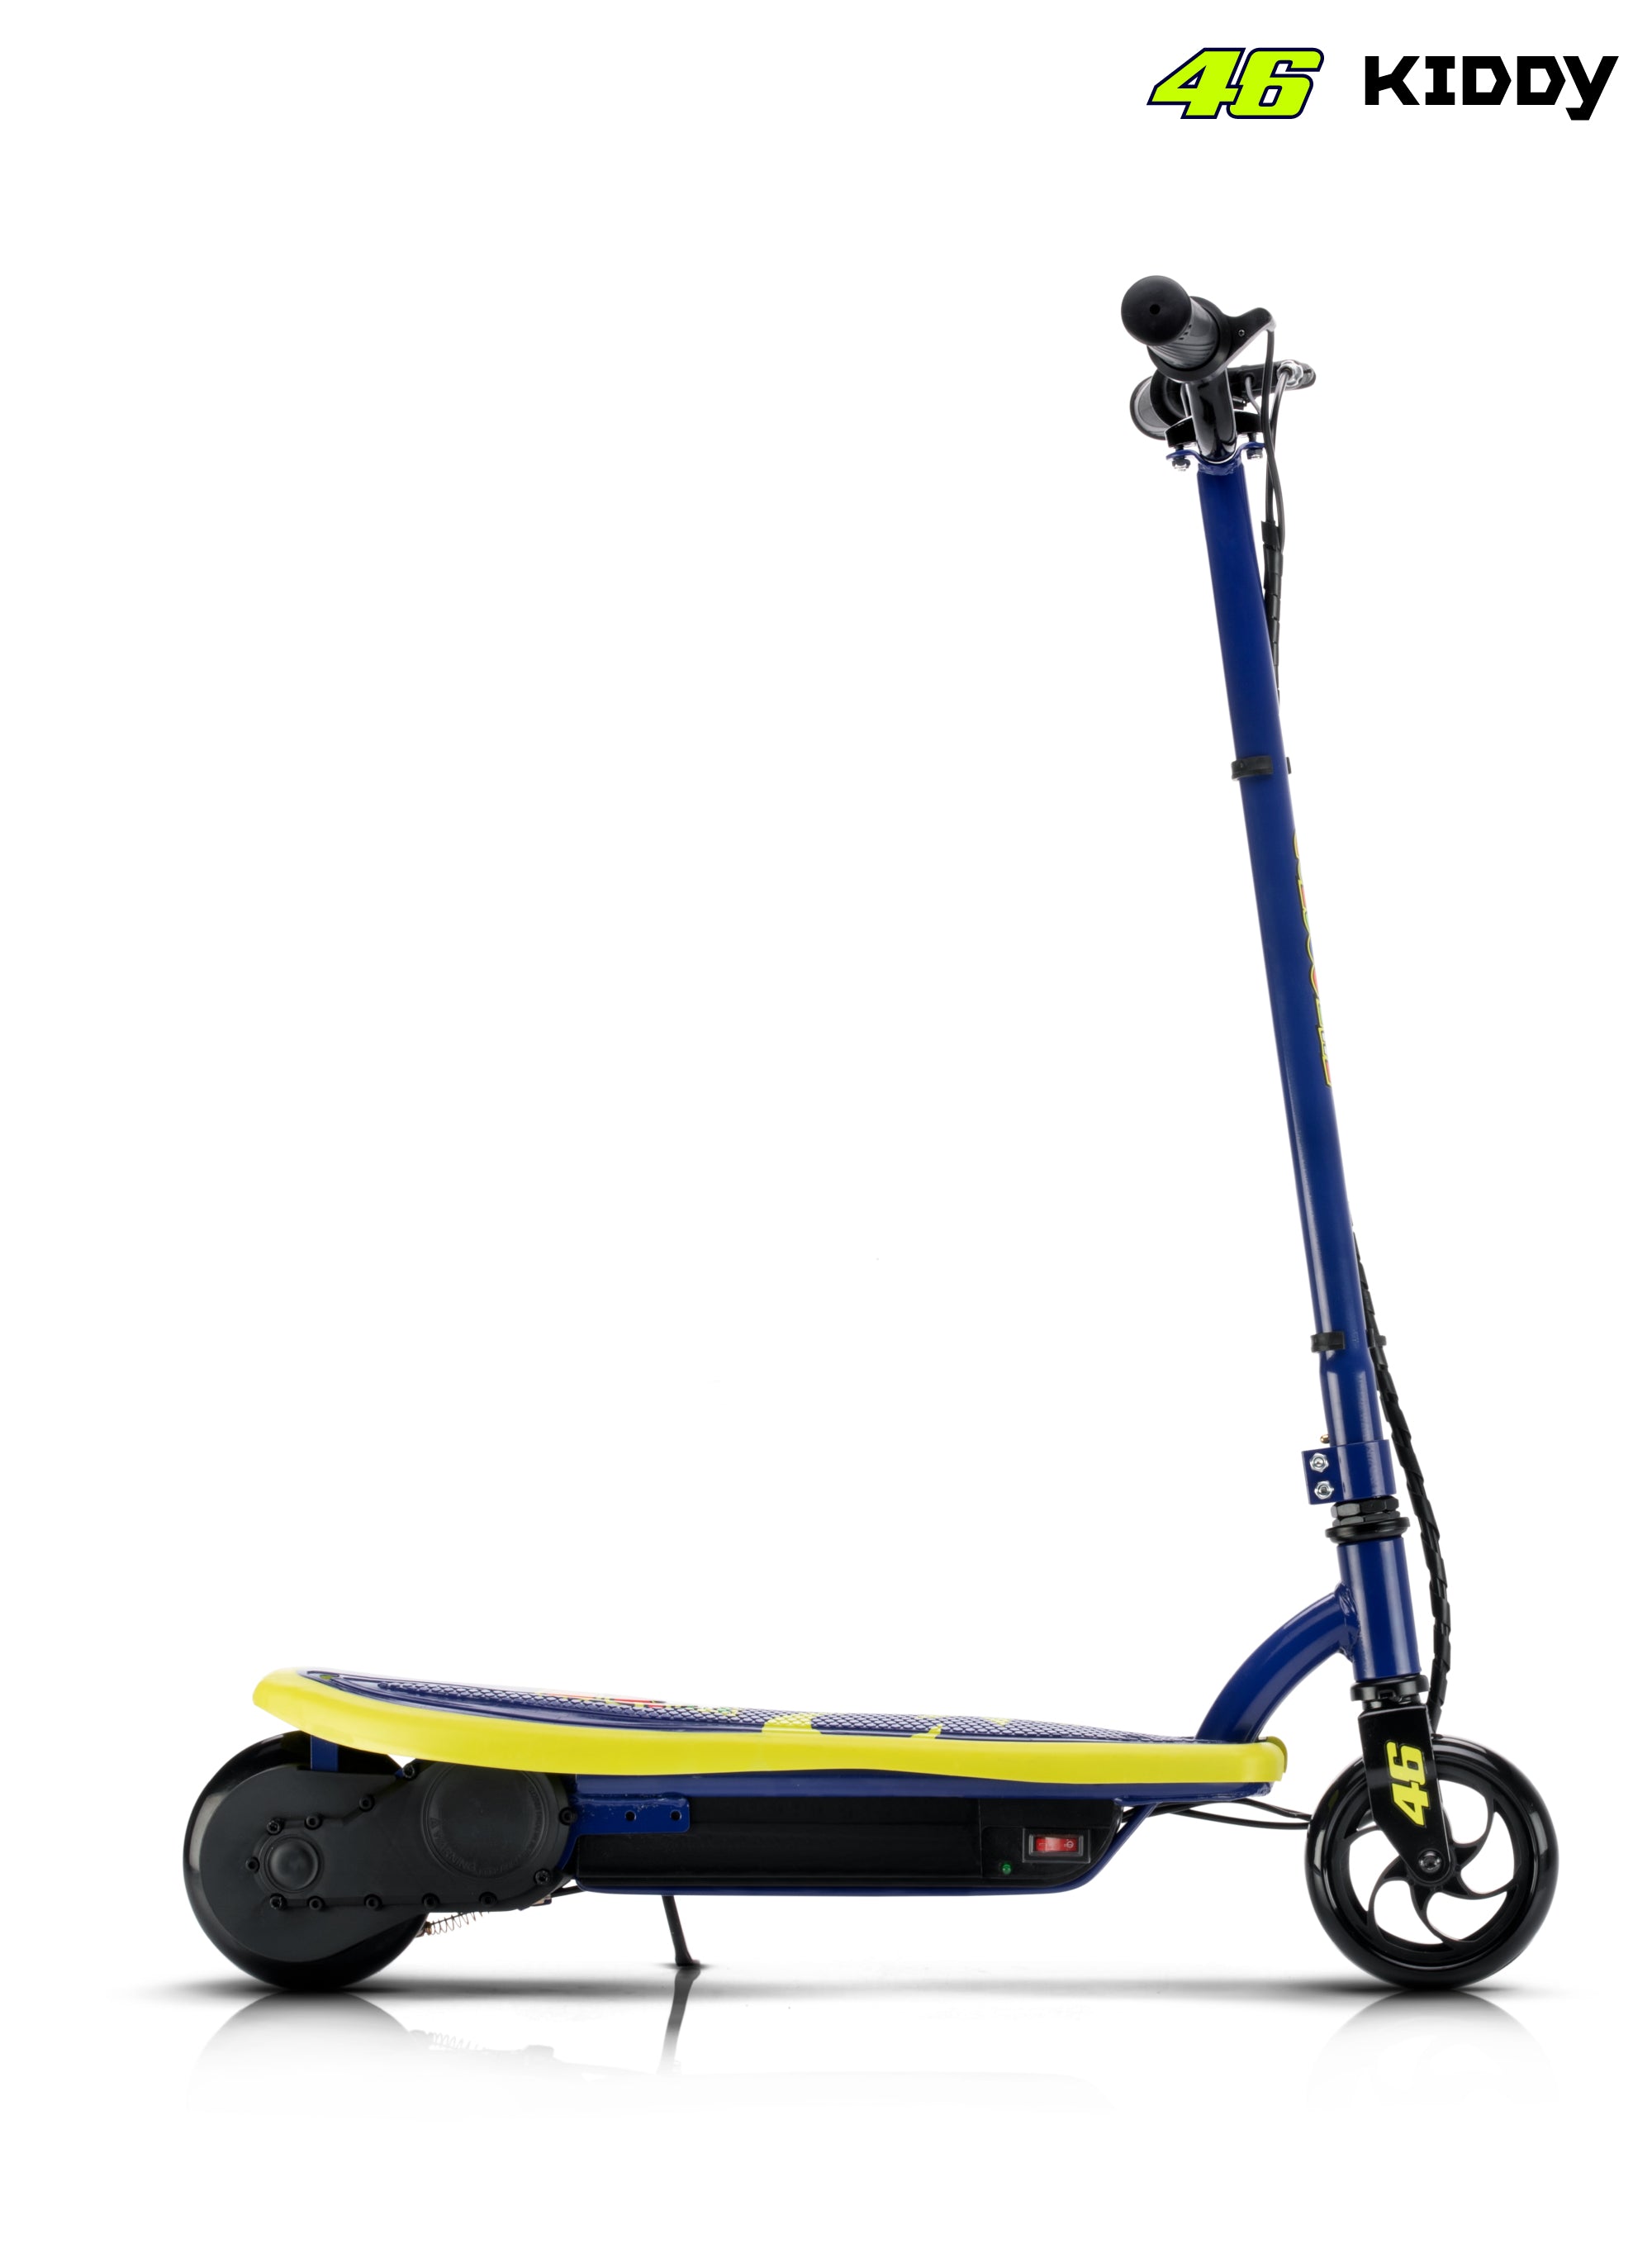 Foldable Kids Electric Scooter VR 46 Kiddy